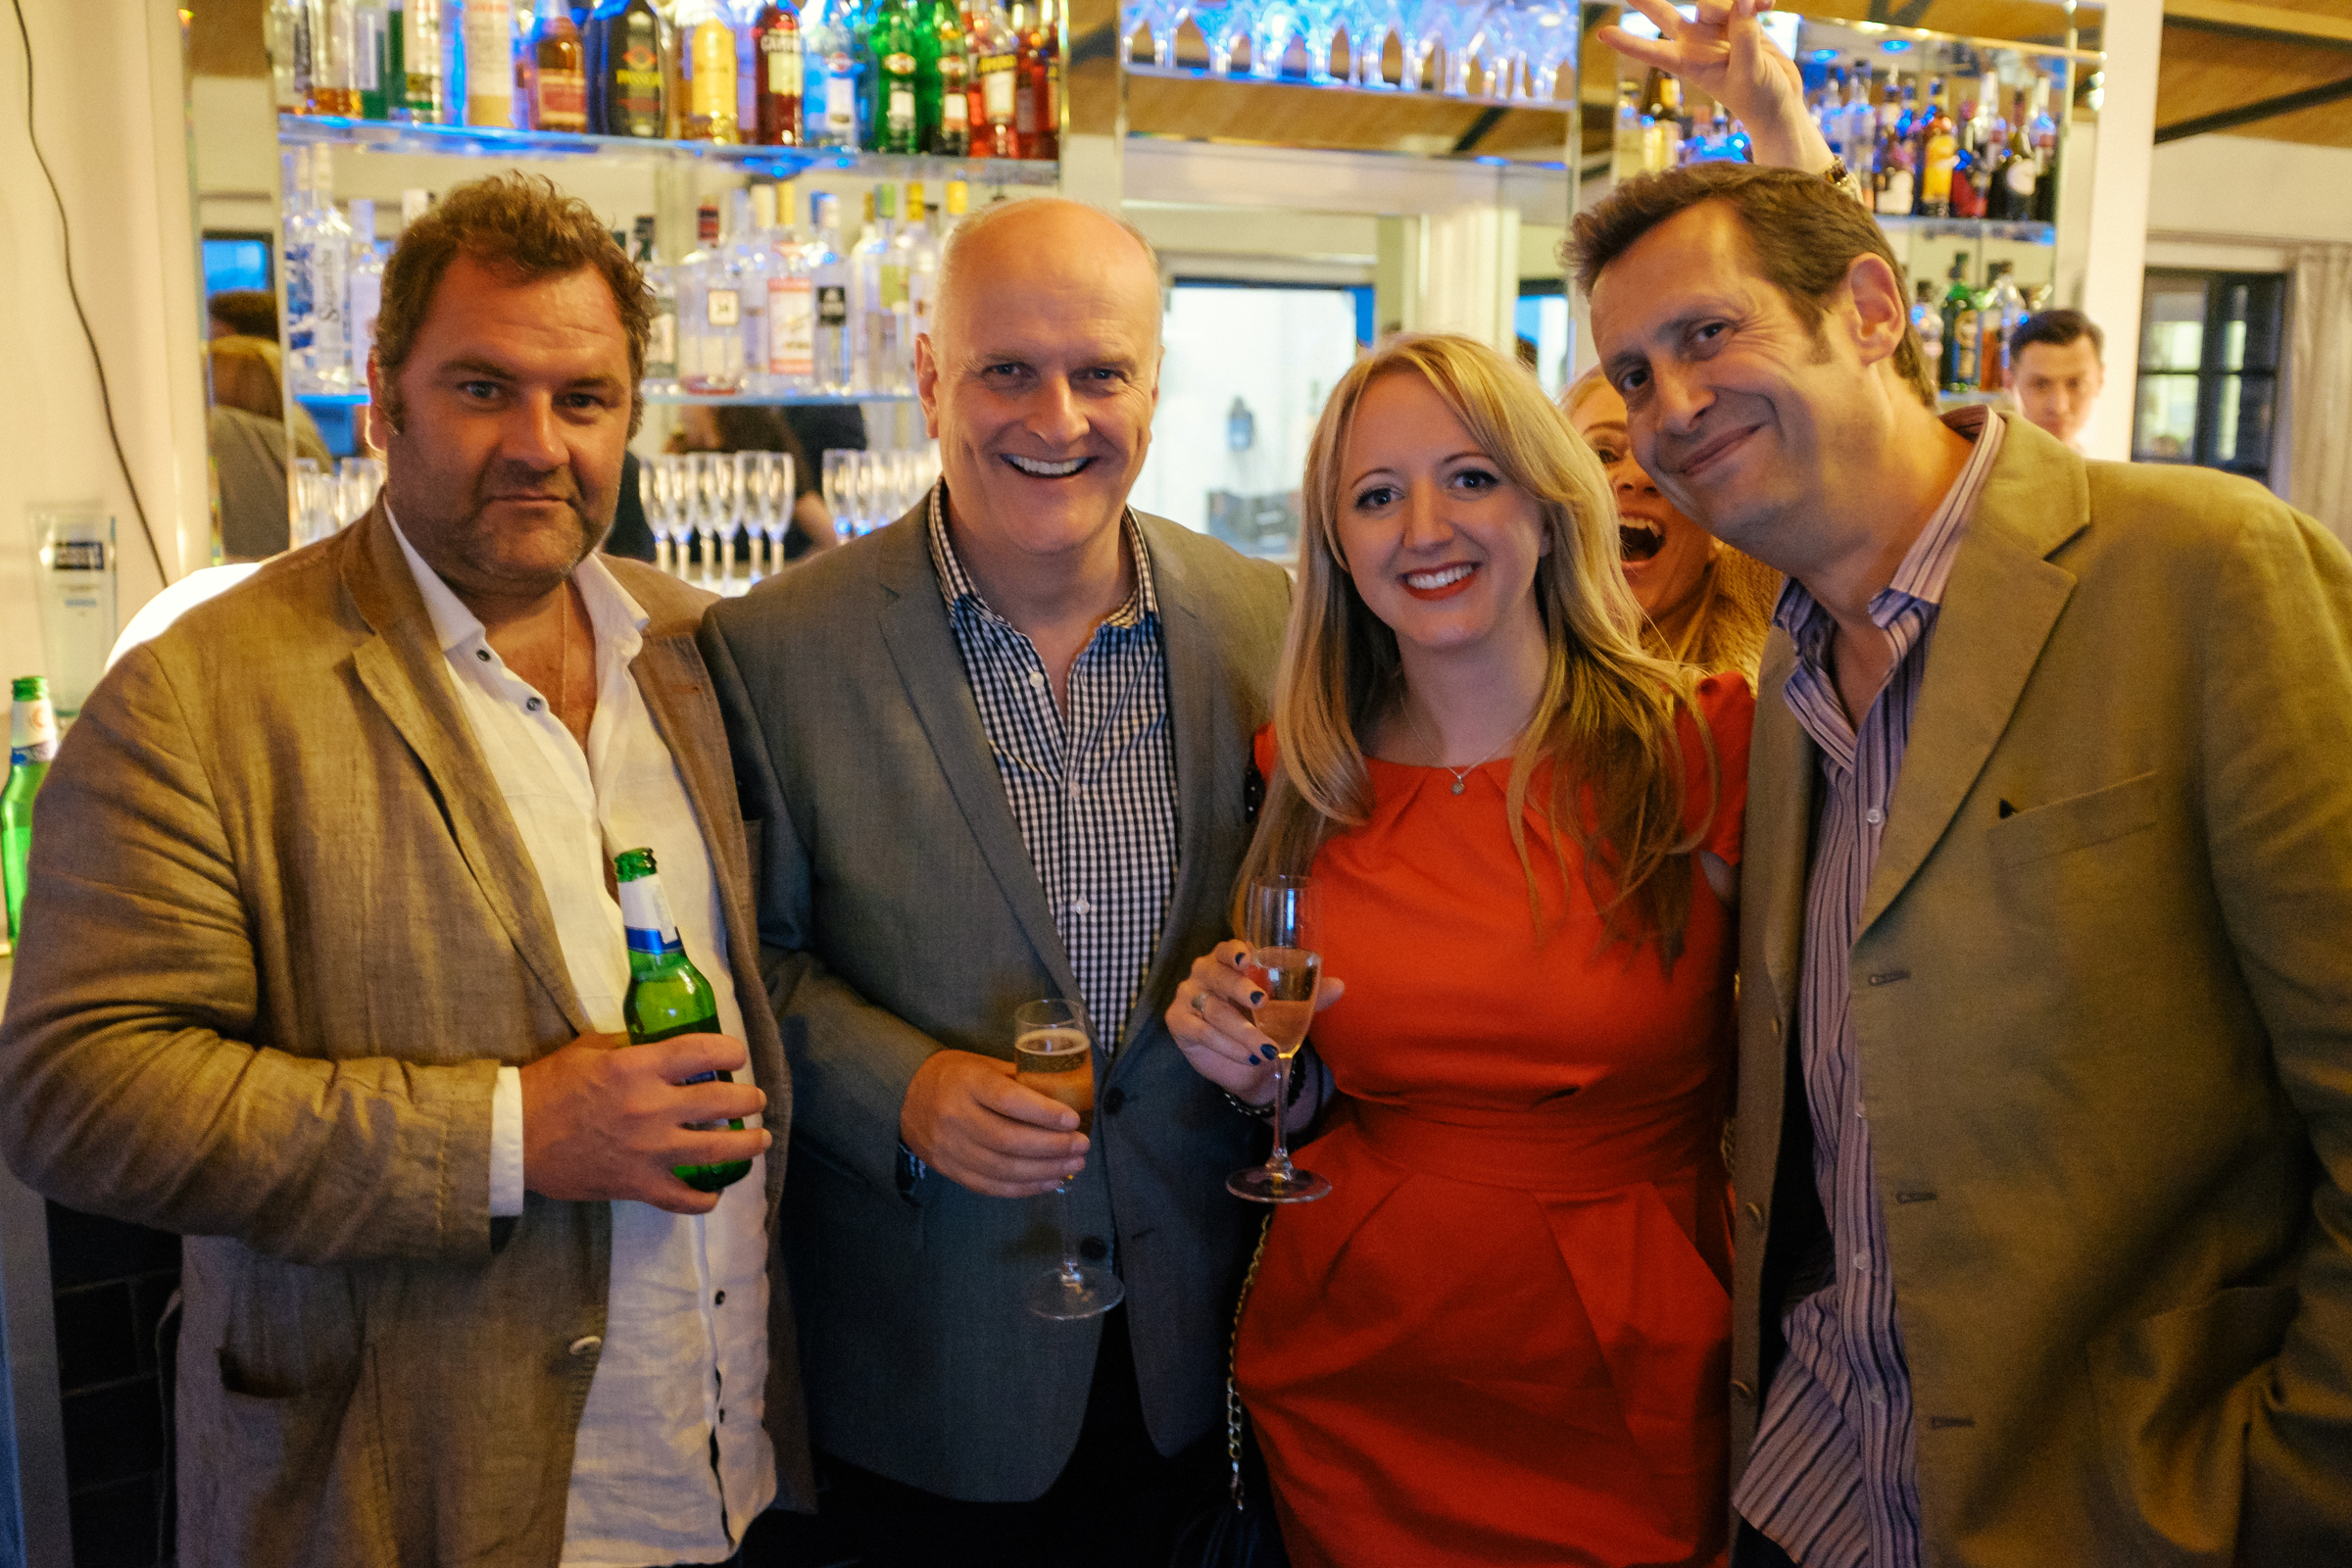 The VoiceOver Network Summer Party